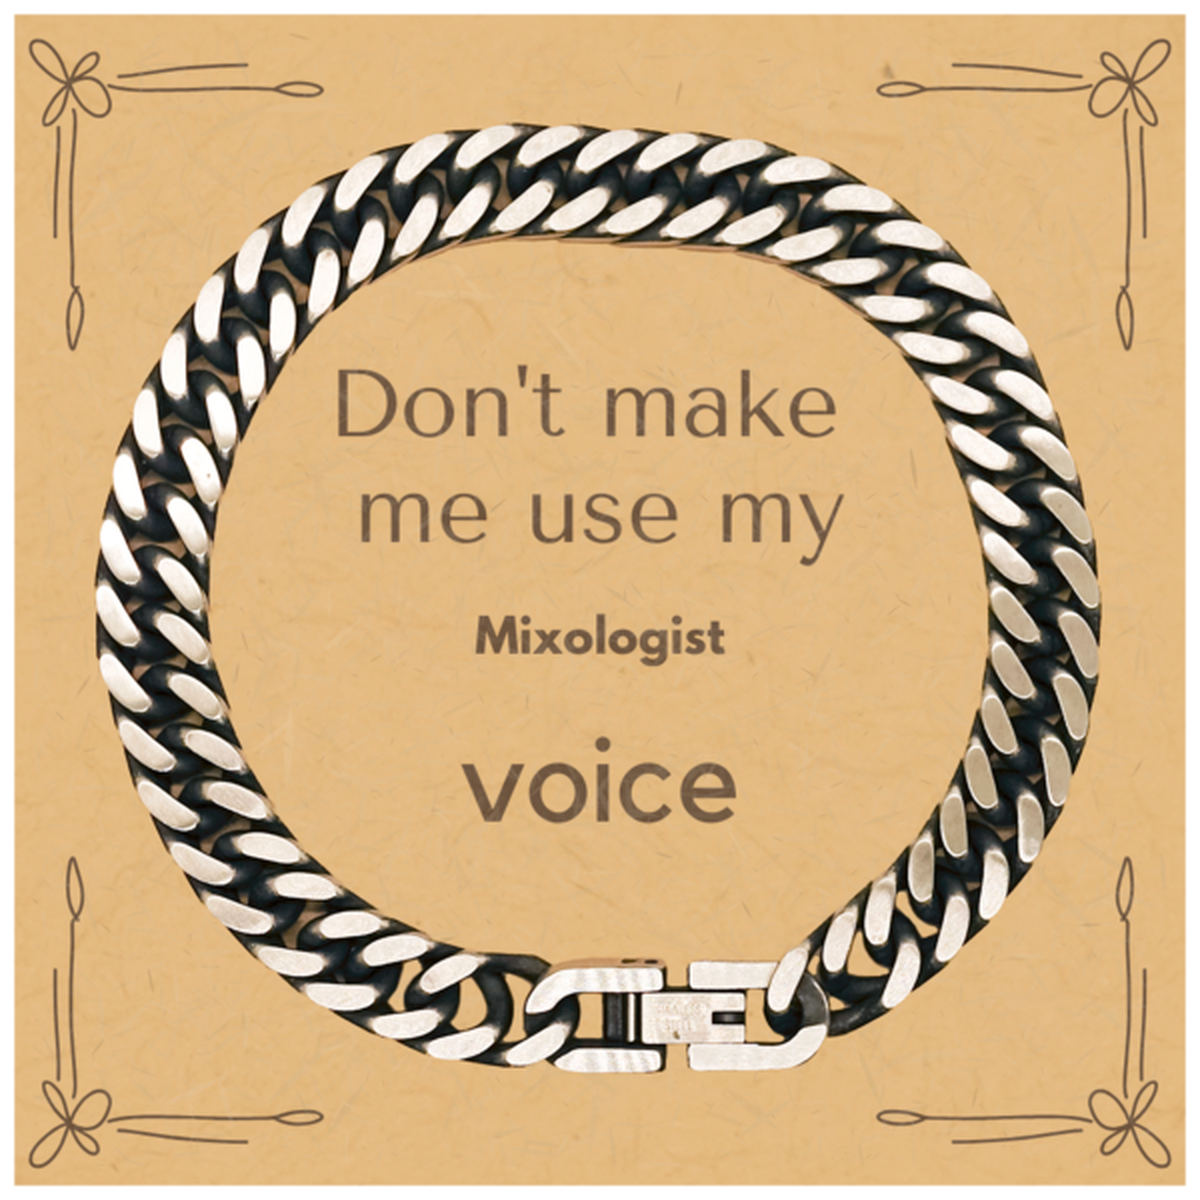 Don't make me use my Mixologist voice, Sarcasm Mixologist Card Gifts, Christmas Mixologist Cuban Link Chain Bracelet Birthday Unique Gifts For Mixologist Coworkers, Men, Women, Colleague, Friends